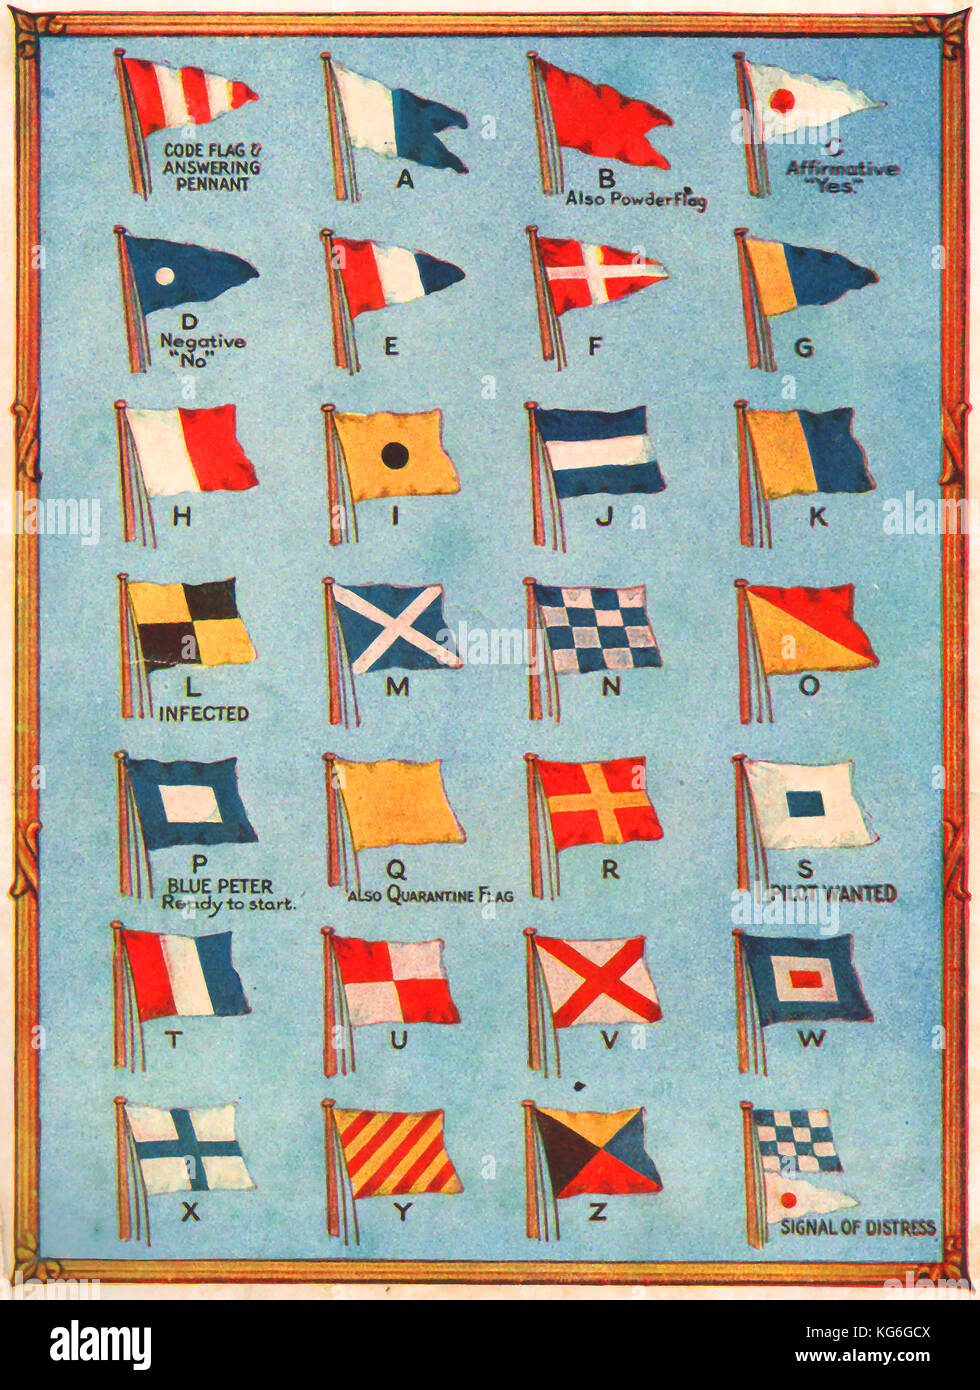 nautical flags and pennants